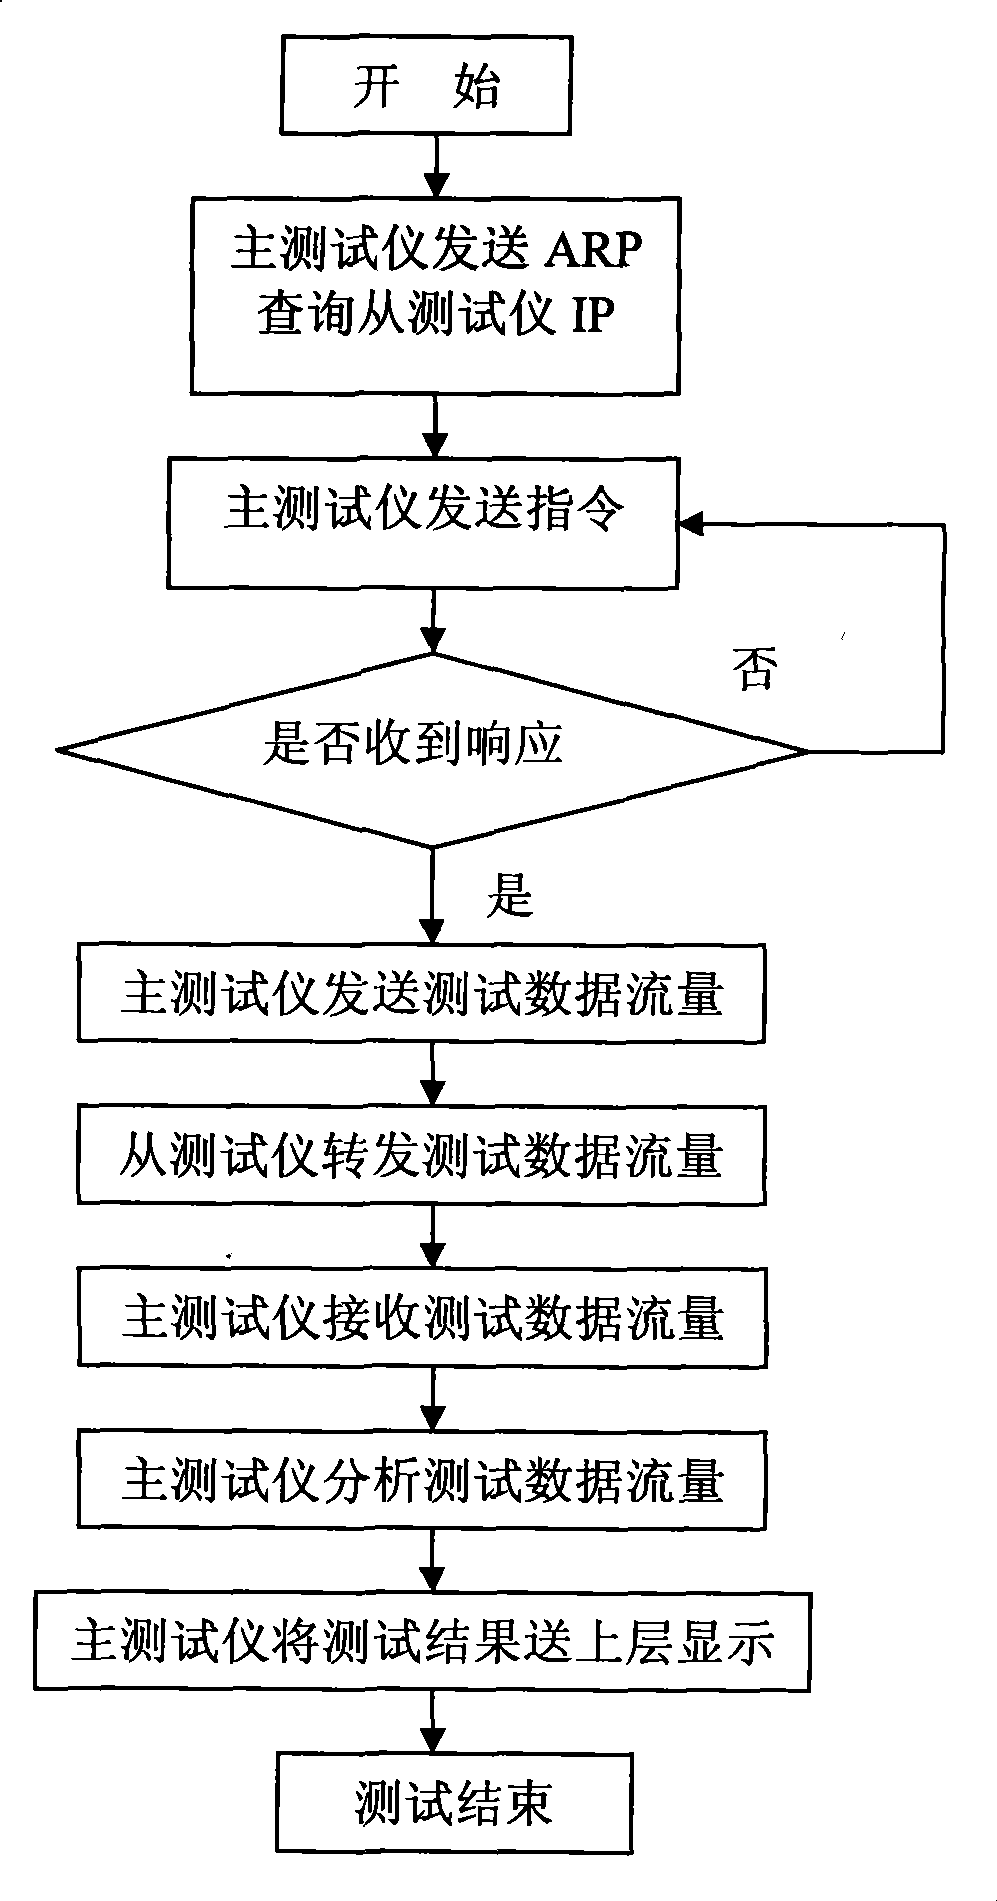 Method and device for testing Ethernet network performance